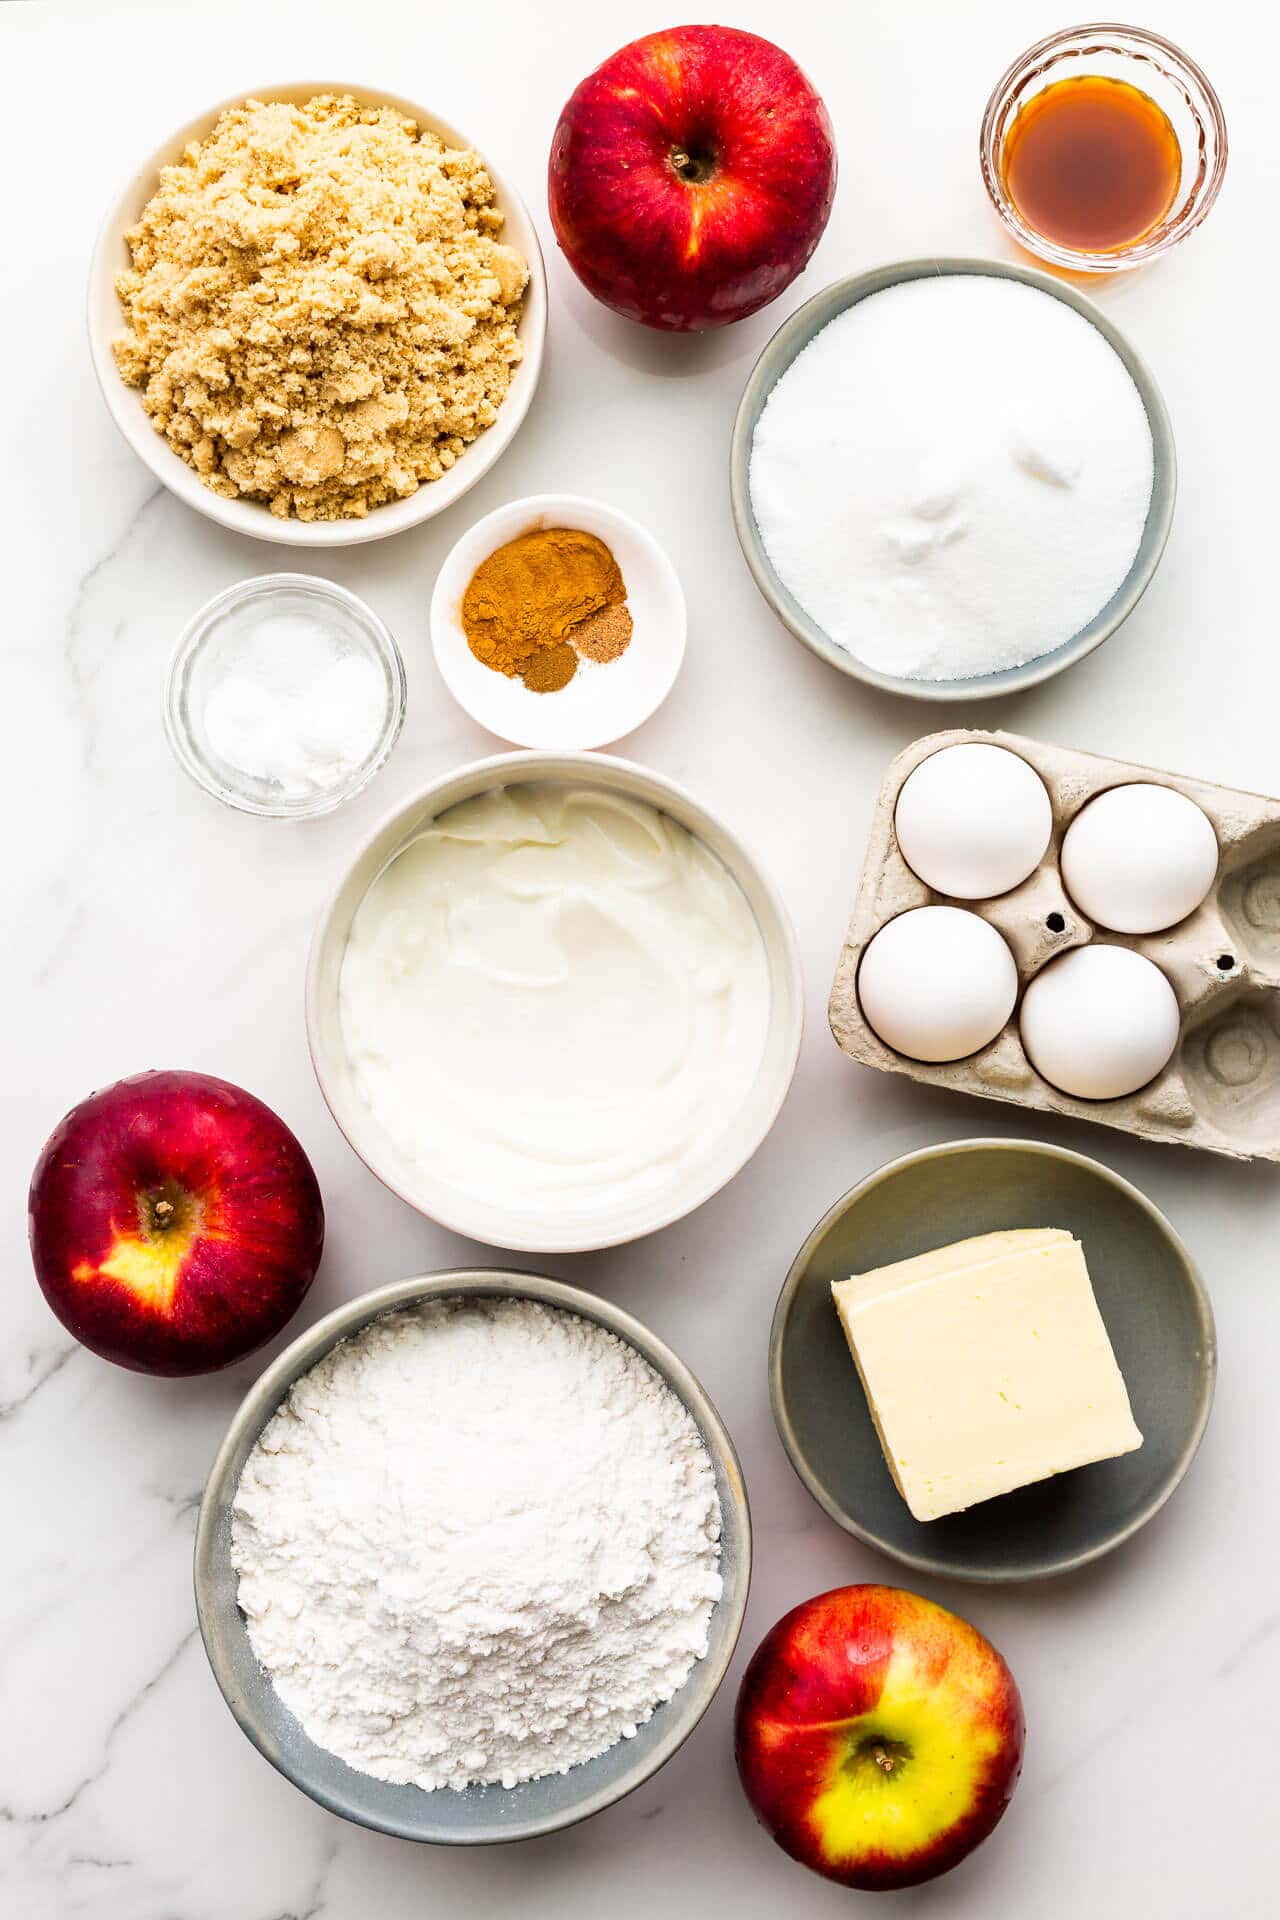 Ingredients to make apple bundt cake measured out including apples, brown sugar, white sugar, spices, sour cream, eggs, salt, baking powder, baking soda, butter, and flour